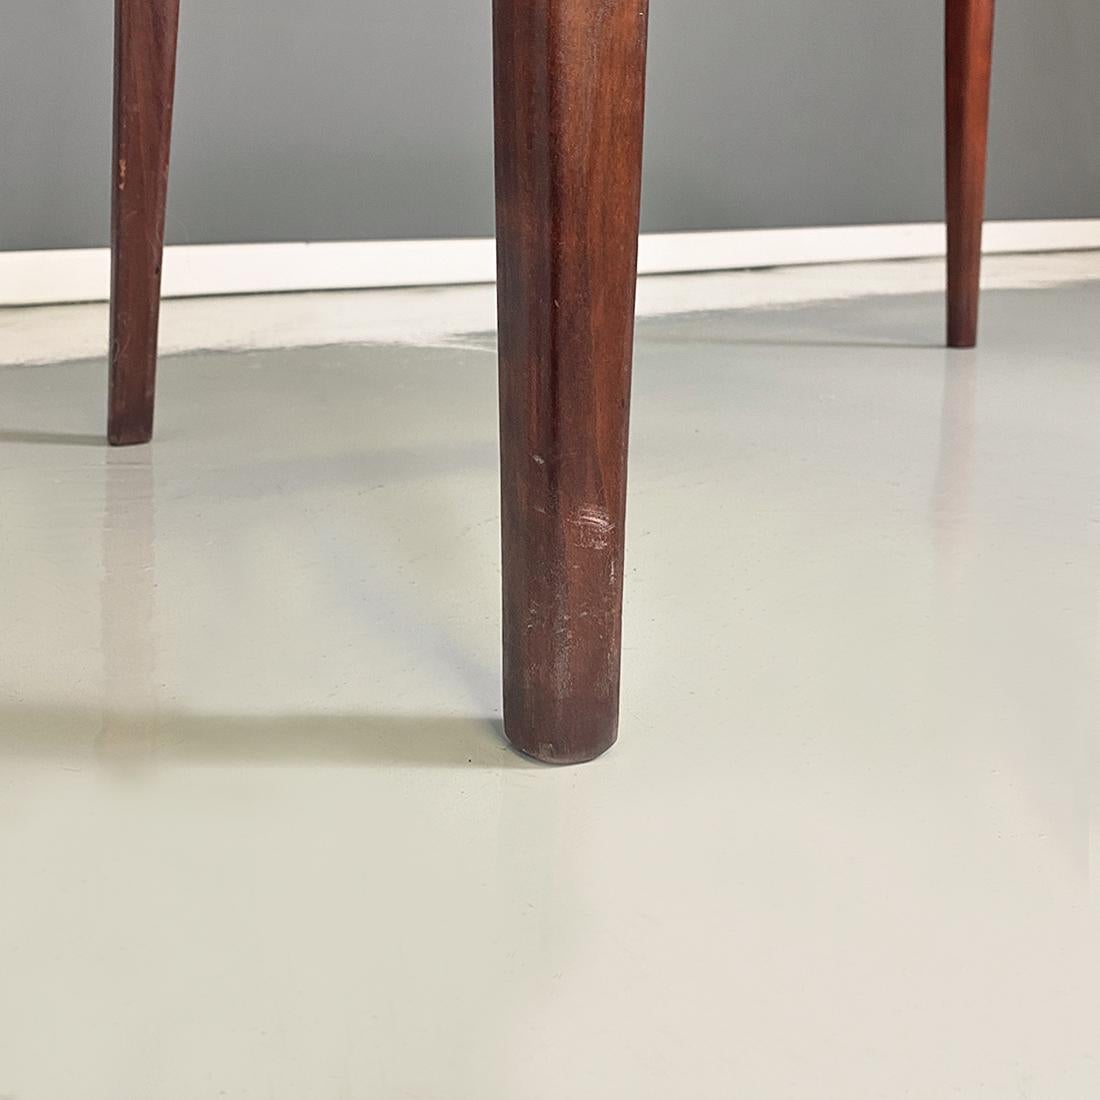 Italian Mid-Century Modern solid wood coffee table with a boomerang shape, 1960s.
Coffee table with structure entirely in solid wood with shaped legs and asymmetrical L-shaped or boomerang-shaped top with a longer and a shorter side.
1960